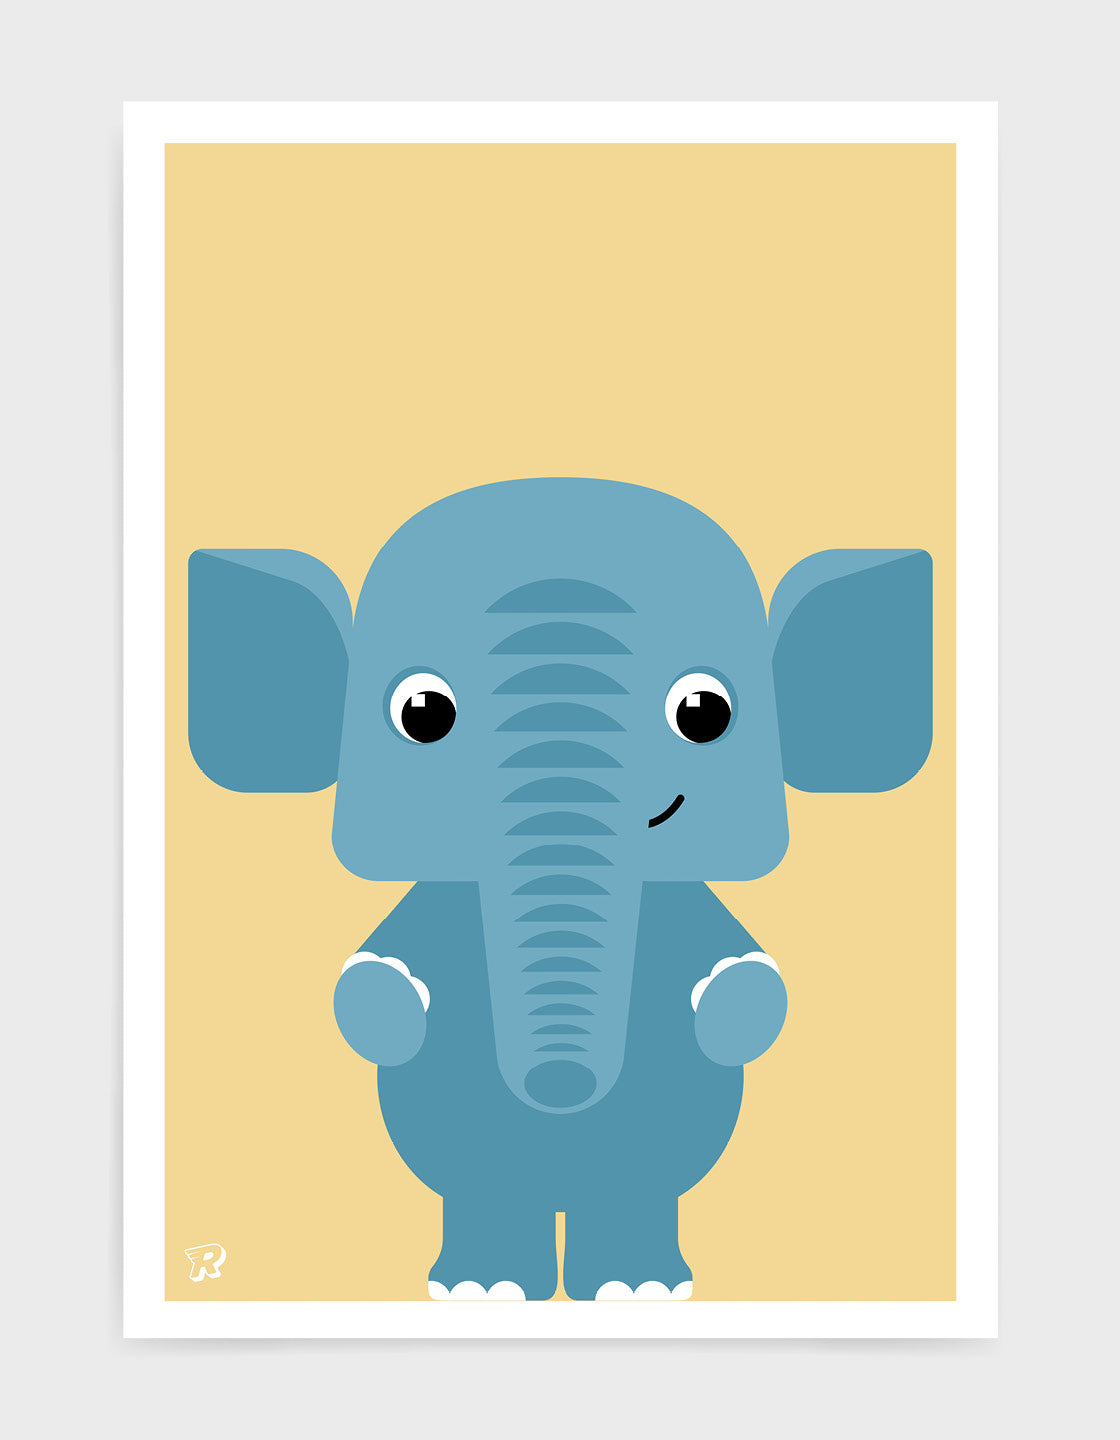 childs art print depicting a cute elephant illustration in blue against a yellow background. 